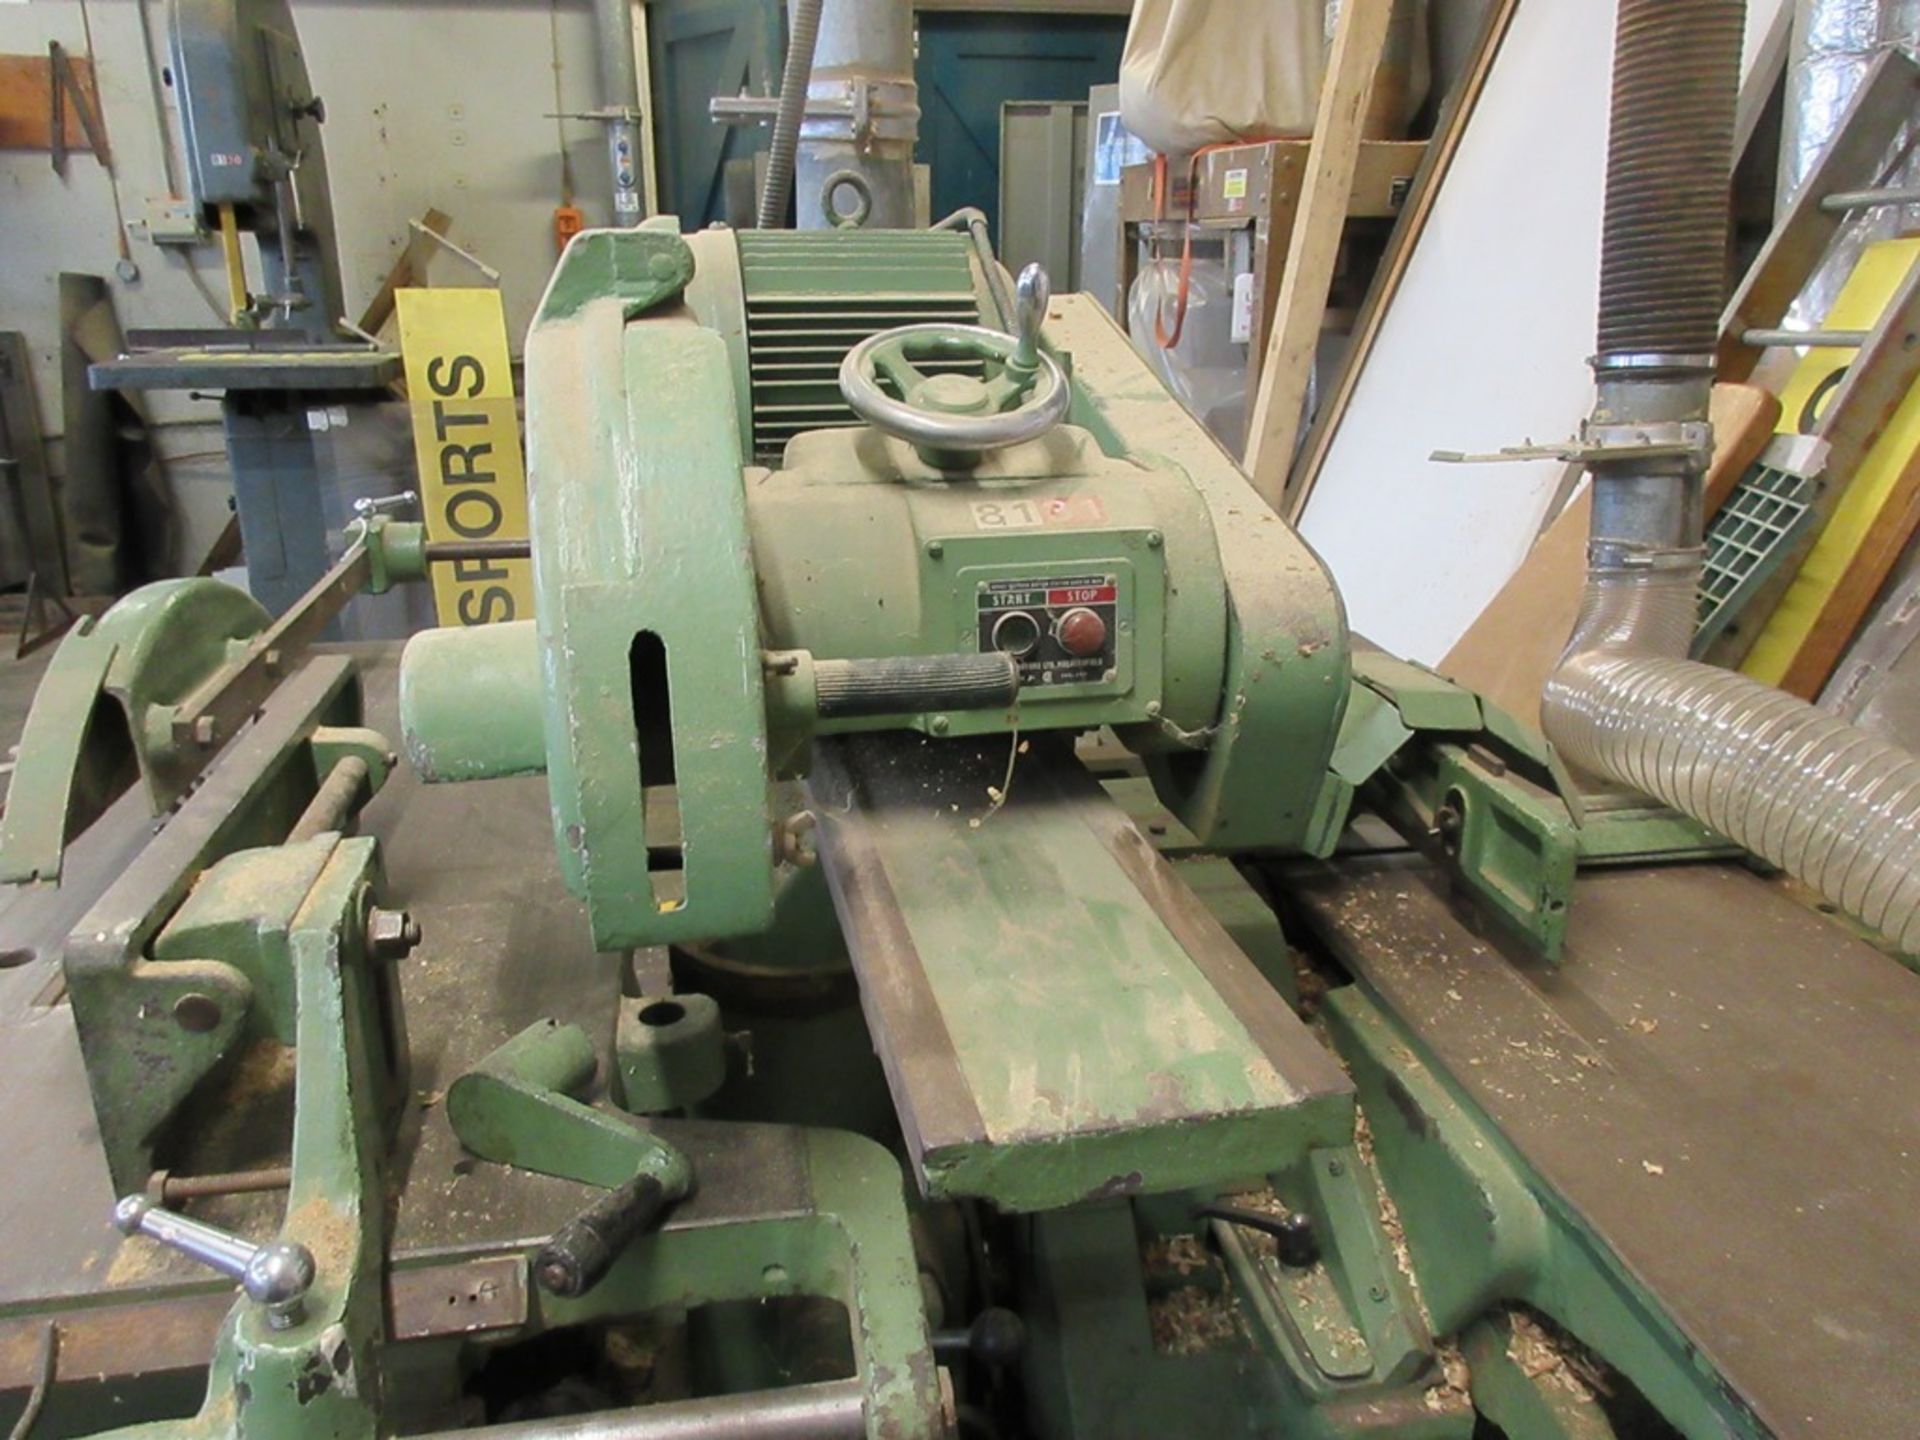 Dominion saw bench / thicknesser planer and cross cut saw, no. 266986, 1.6m x 1.6m, 3 phase, with - Image 5 of 9